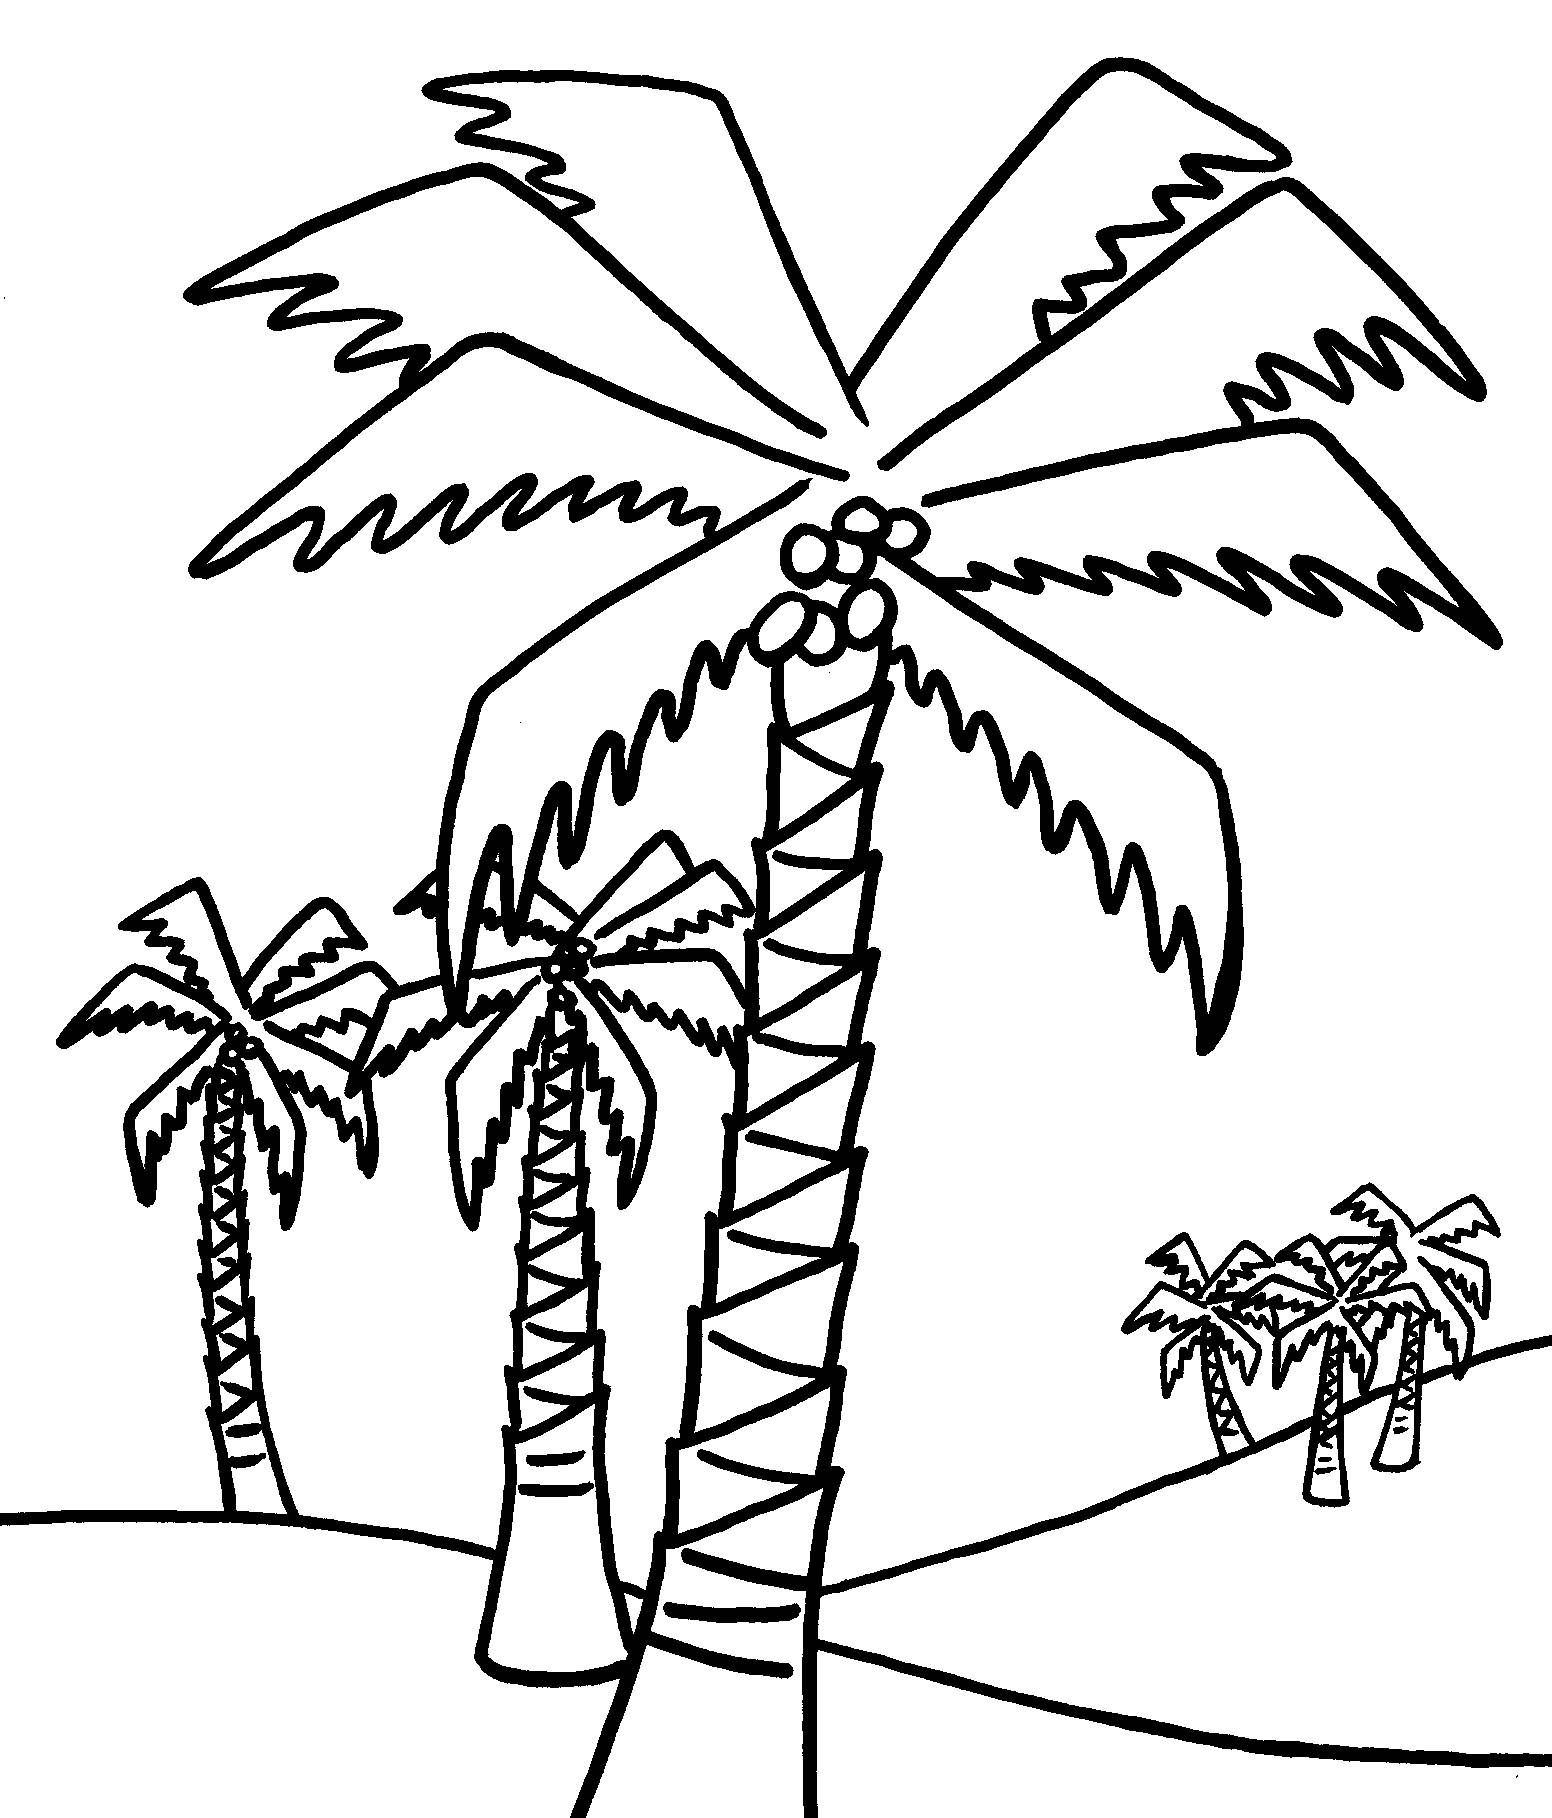 Free Printable Tree Coloring Pages For Kids | Coloring Pages | Tree - Free Printable Palm Tree Template